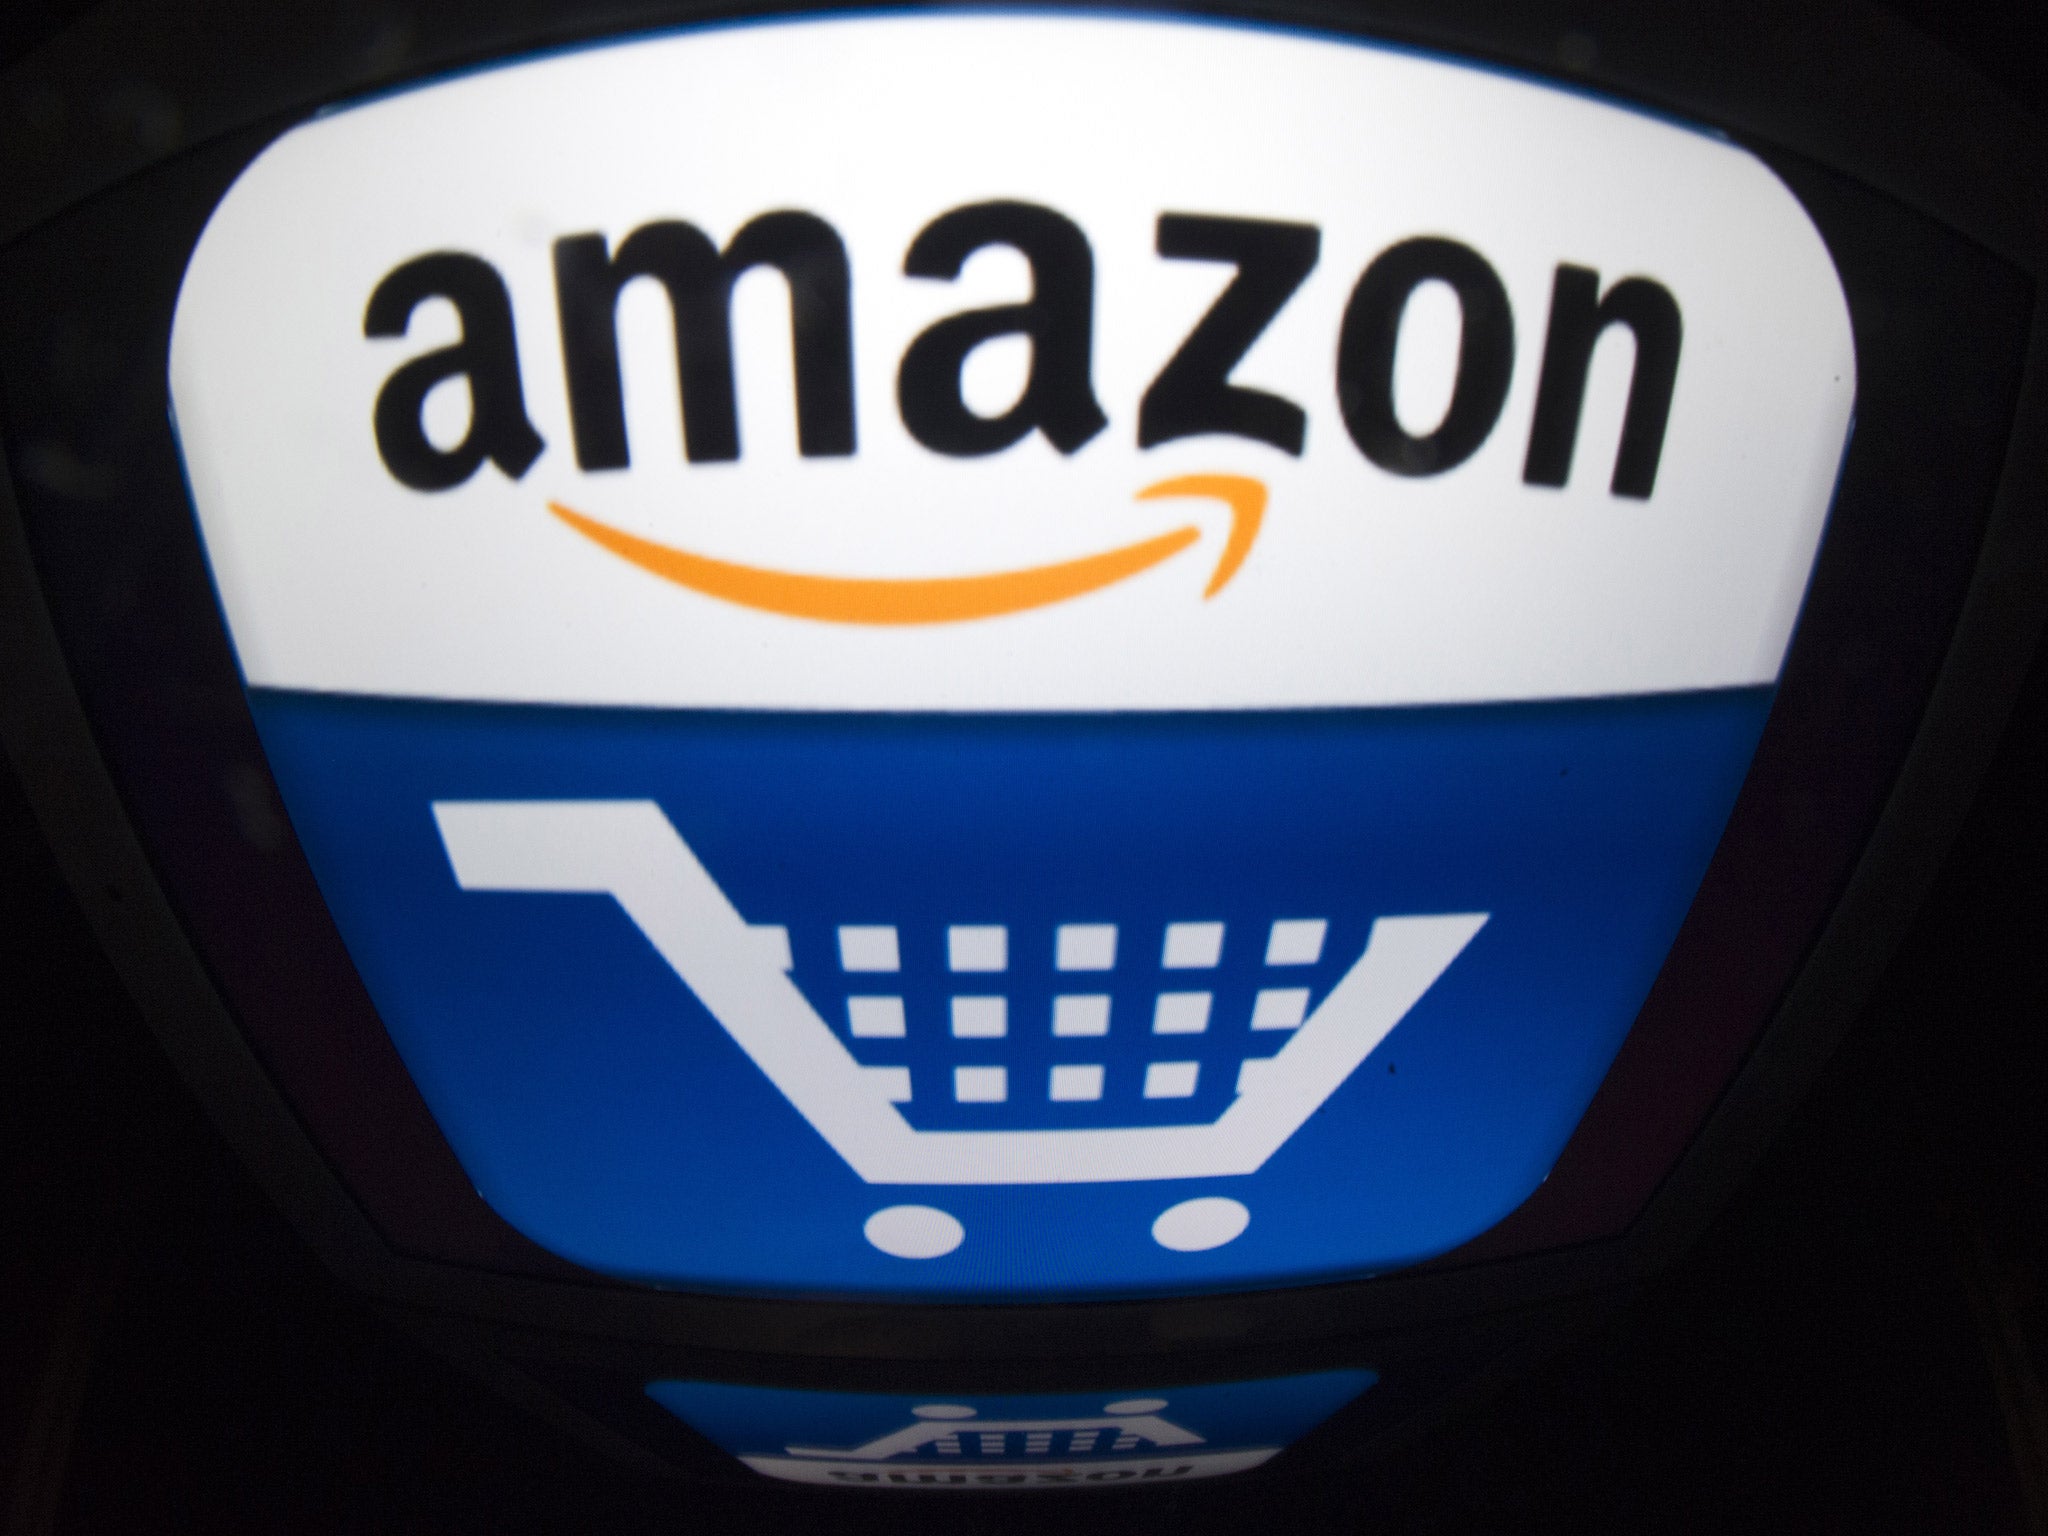 Amazon announced profits of £64m in the first quarter of 2014